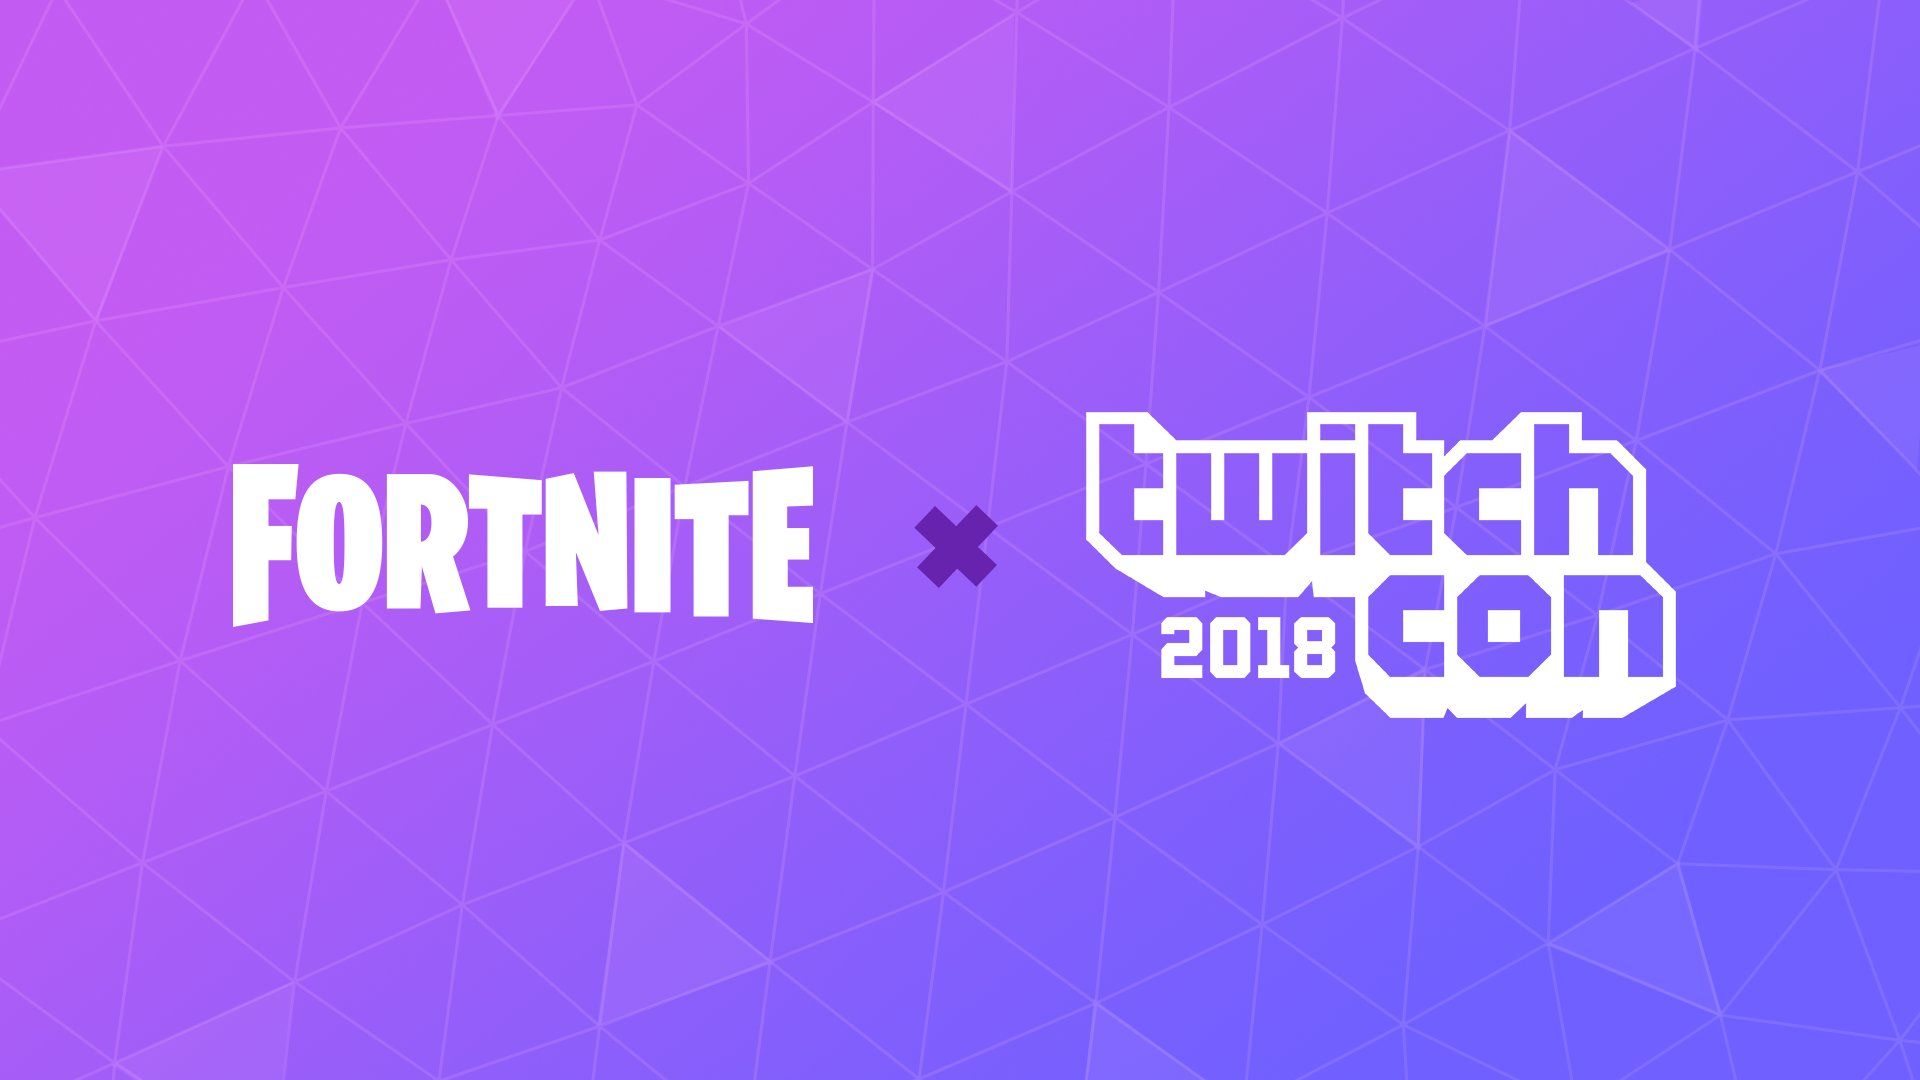 Fortnite at TwitchCon 2018